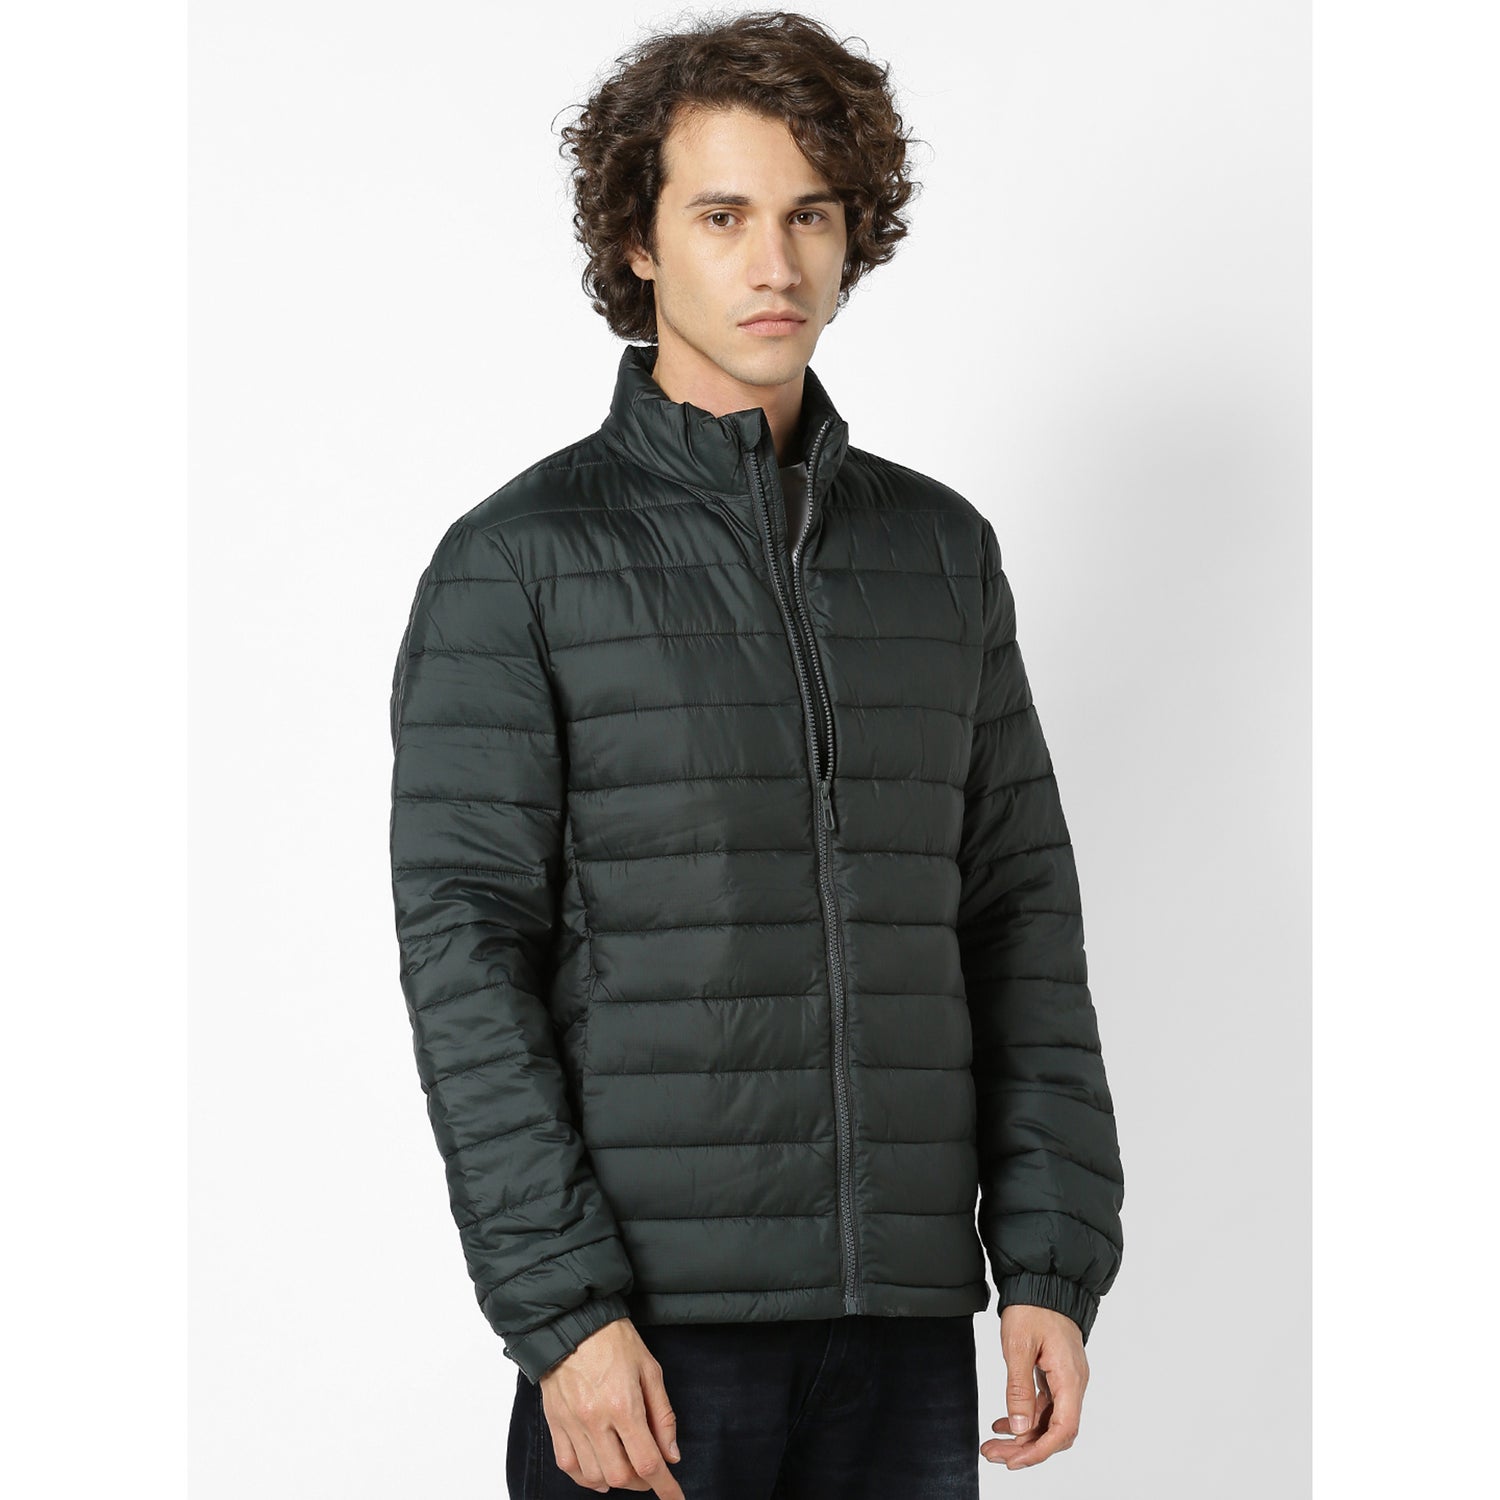 Green Solid Padded Jacket (SUNEW)